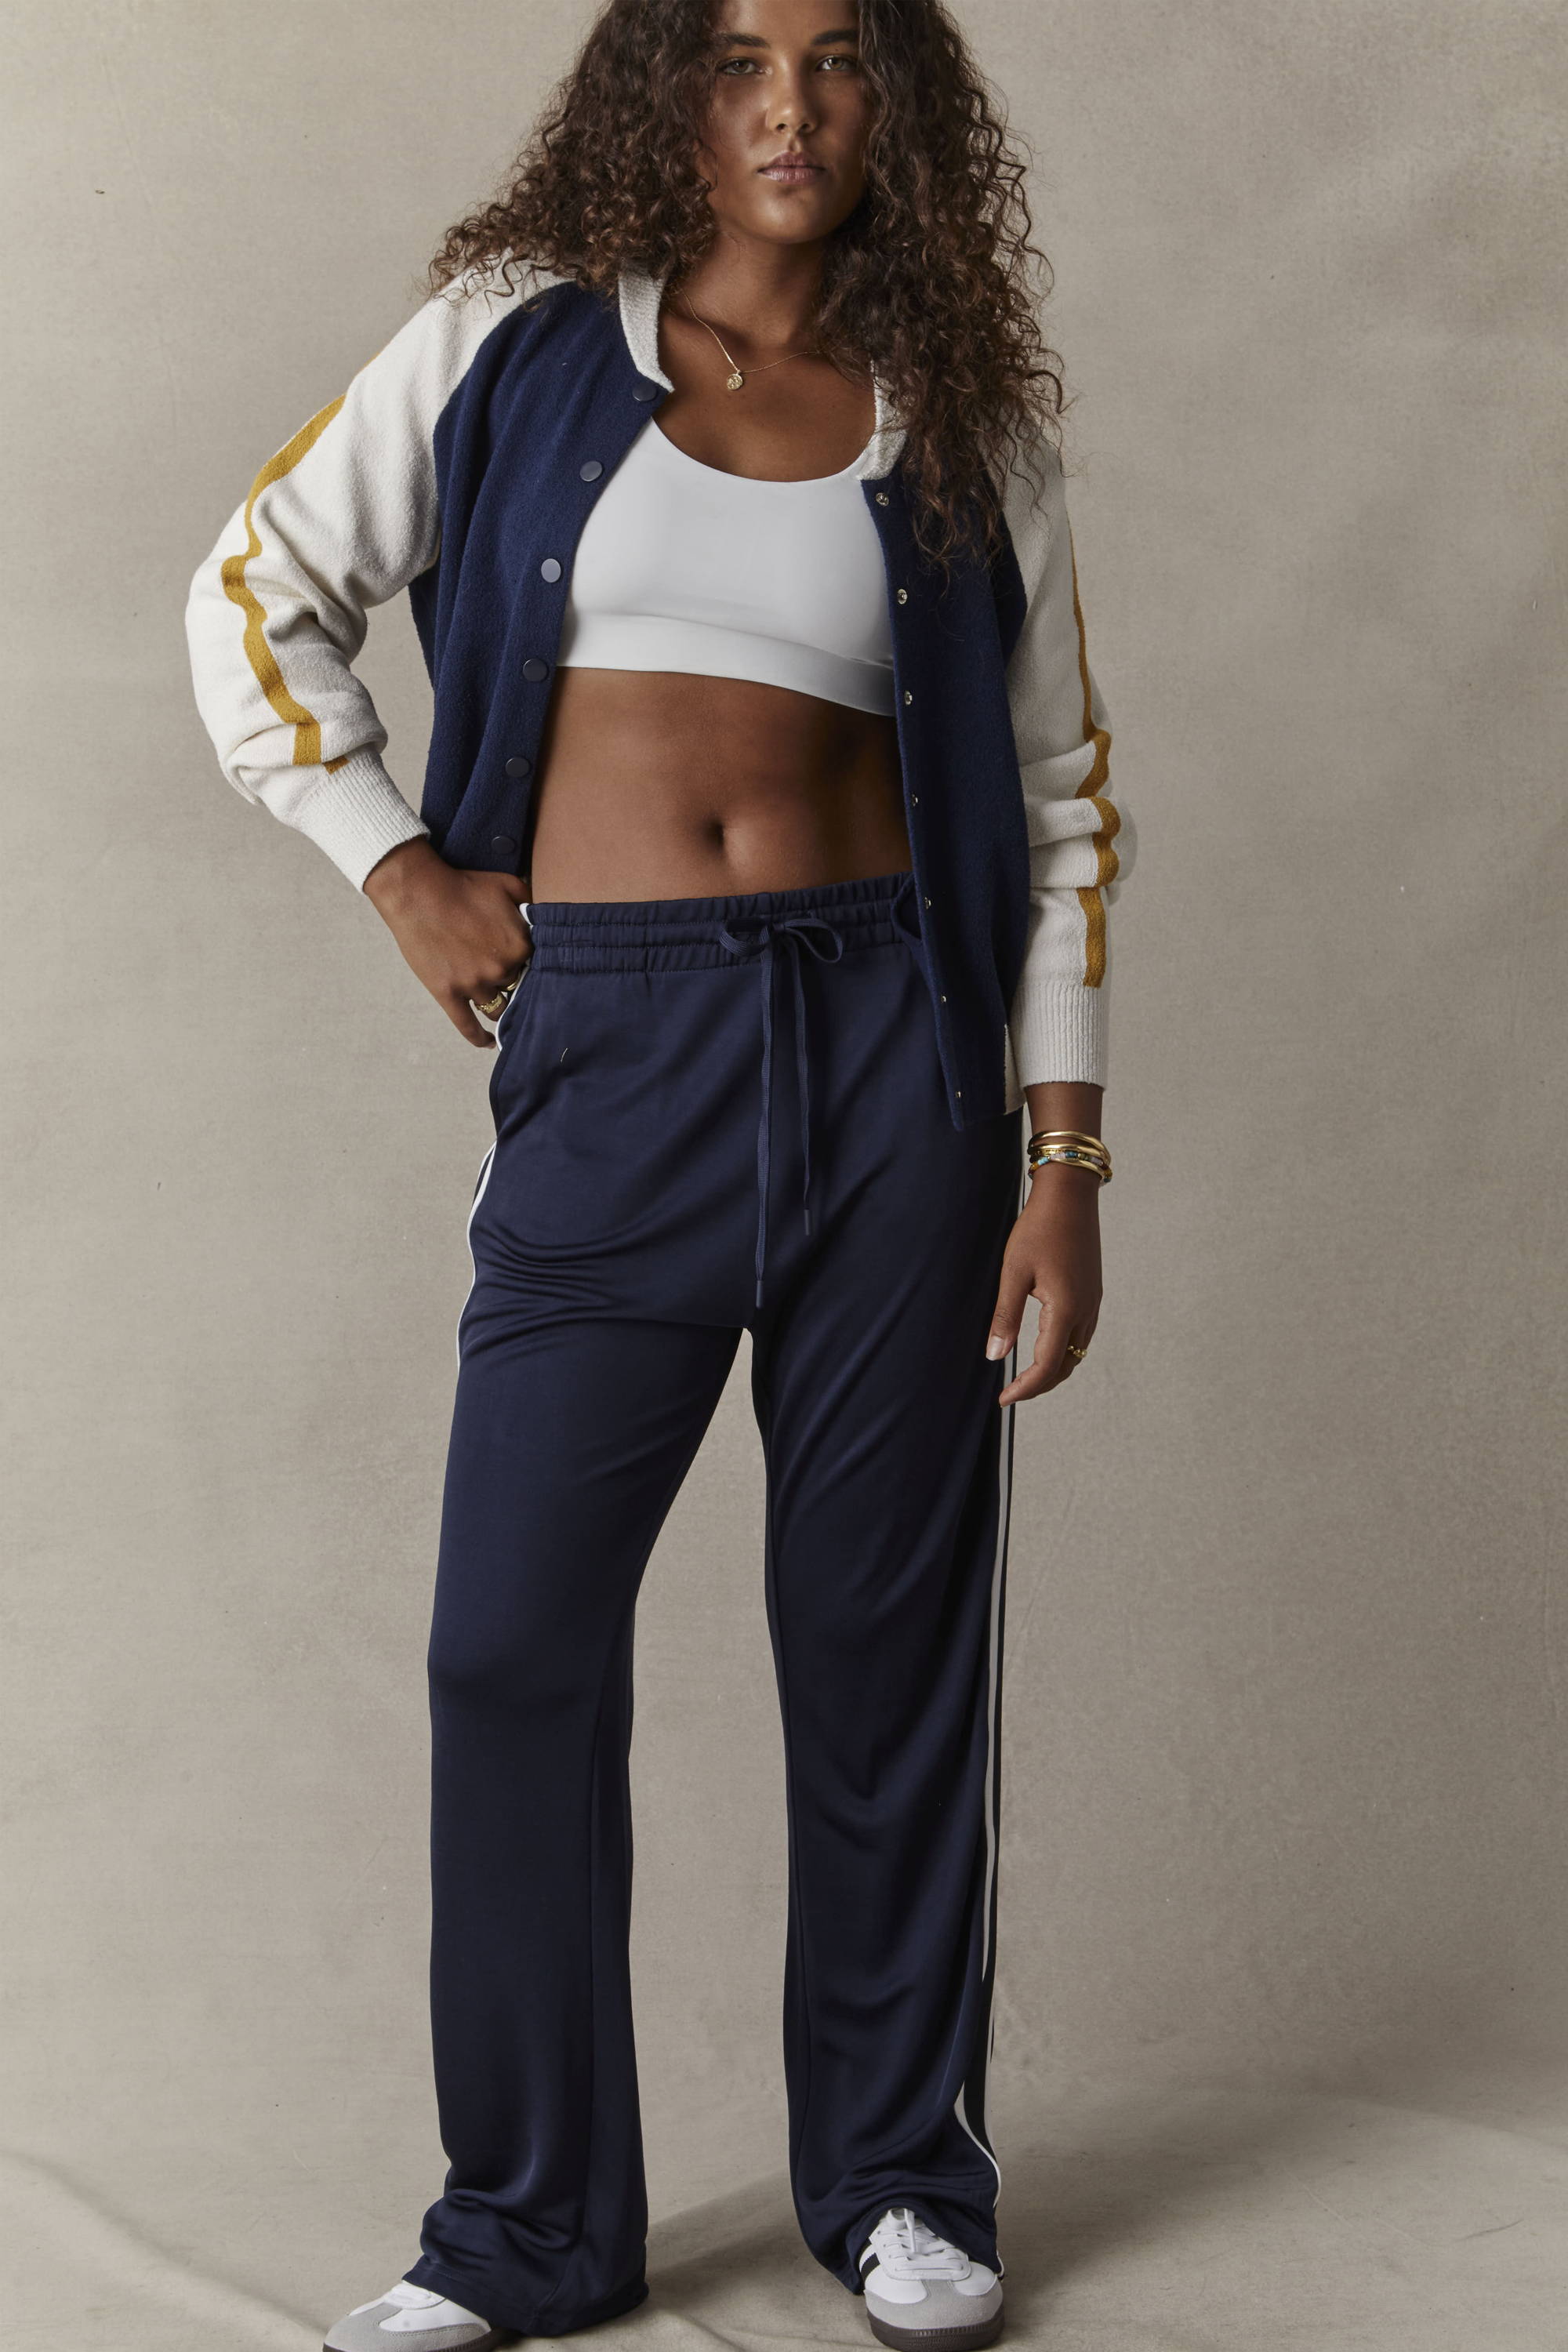 THE UPSIDE navy Celeste Pant worn with the navy Club Hallie Knit Bomber and white Peached Jade Bra.